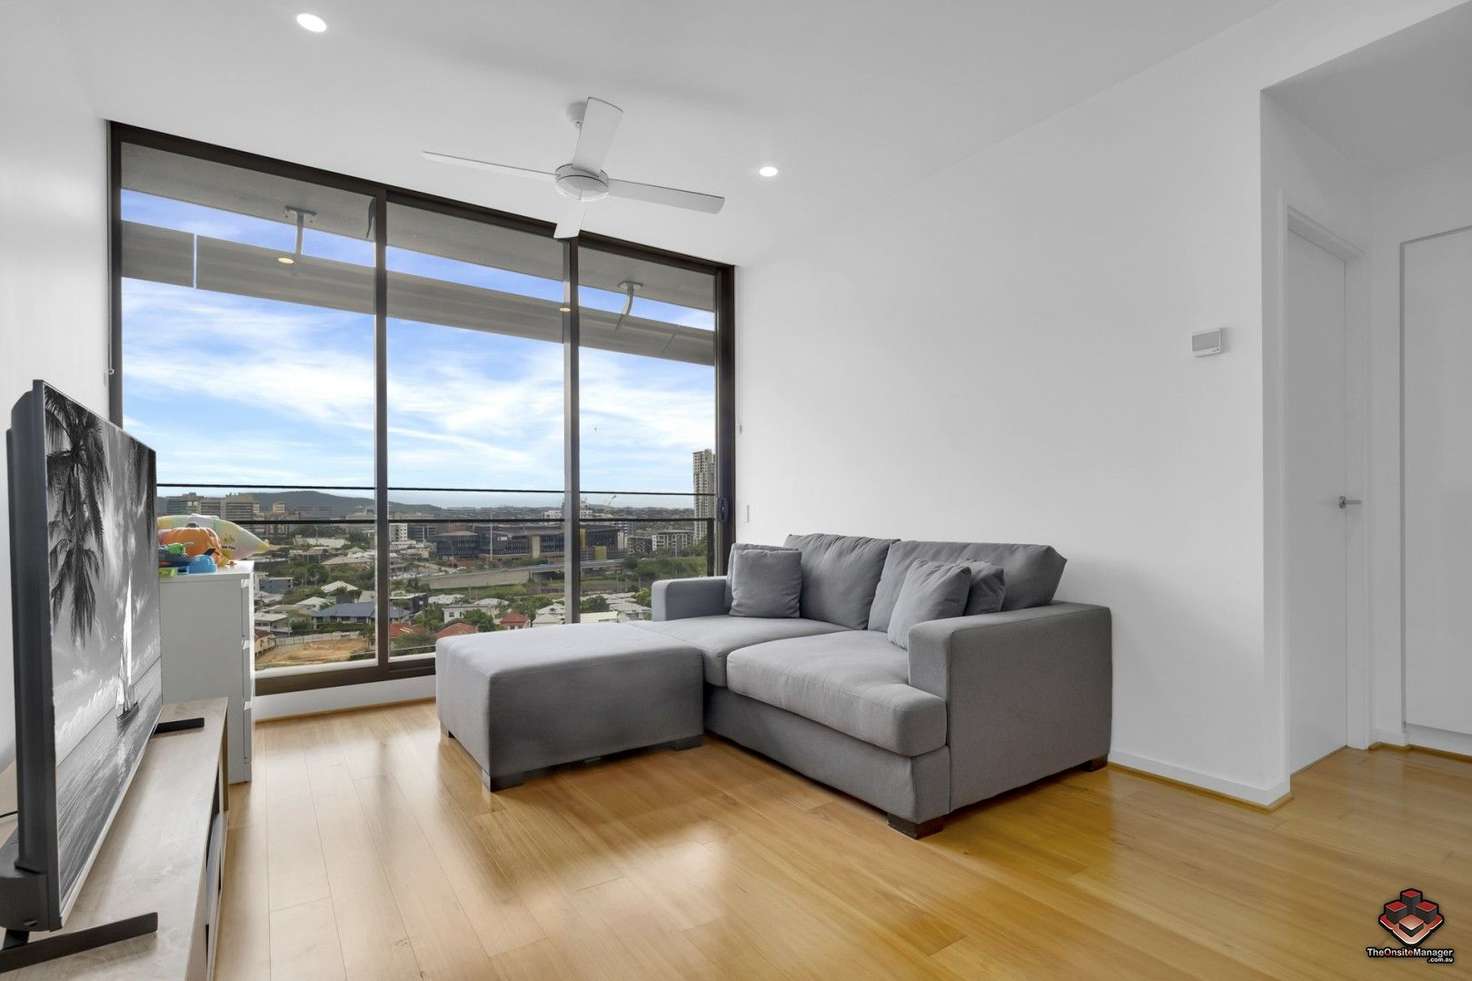 Main view of Homely apartment listing, ID:21127321/1033 Ann Street, Newstead QLD 4006